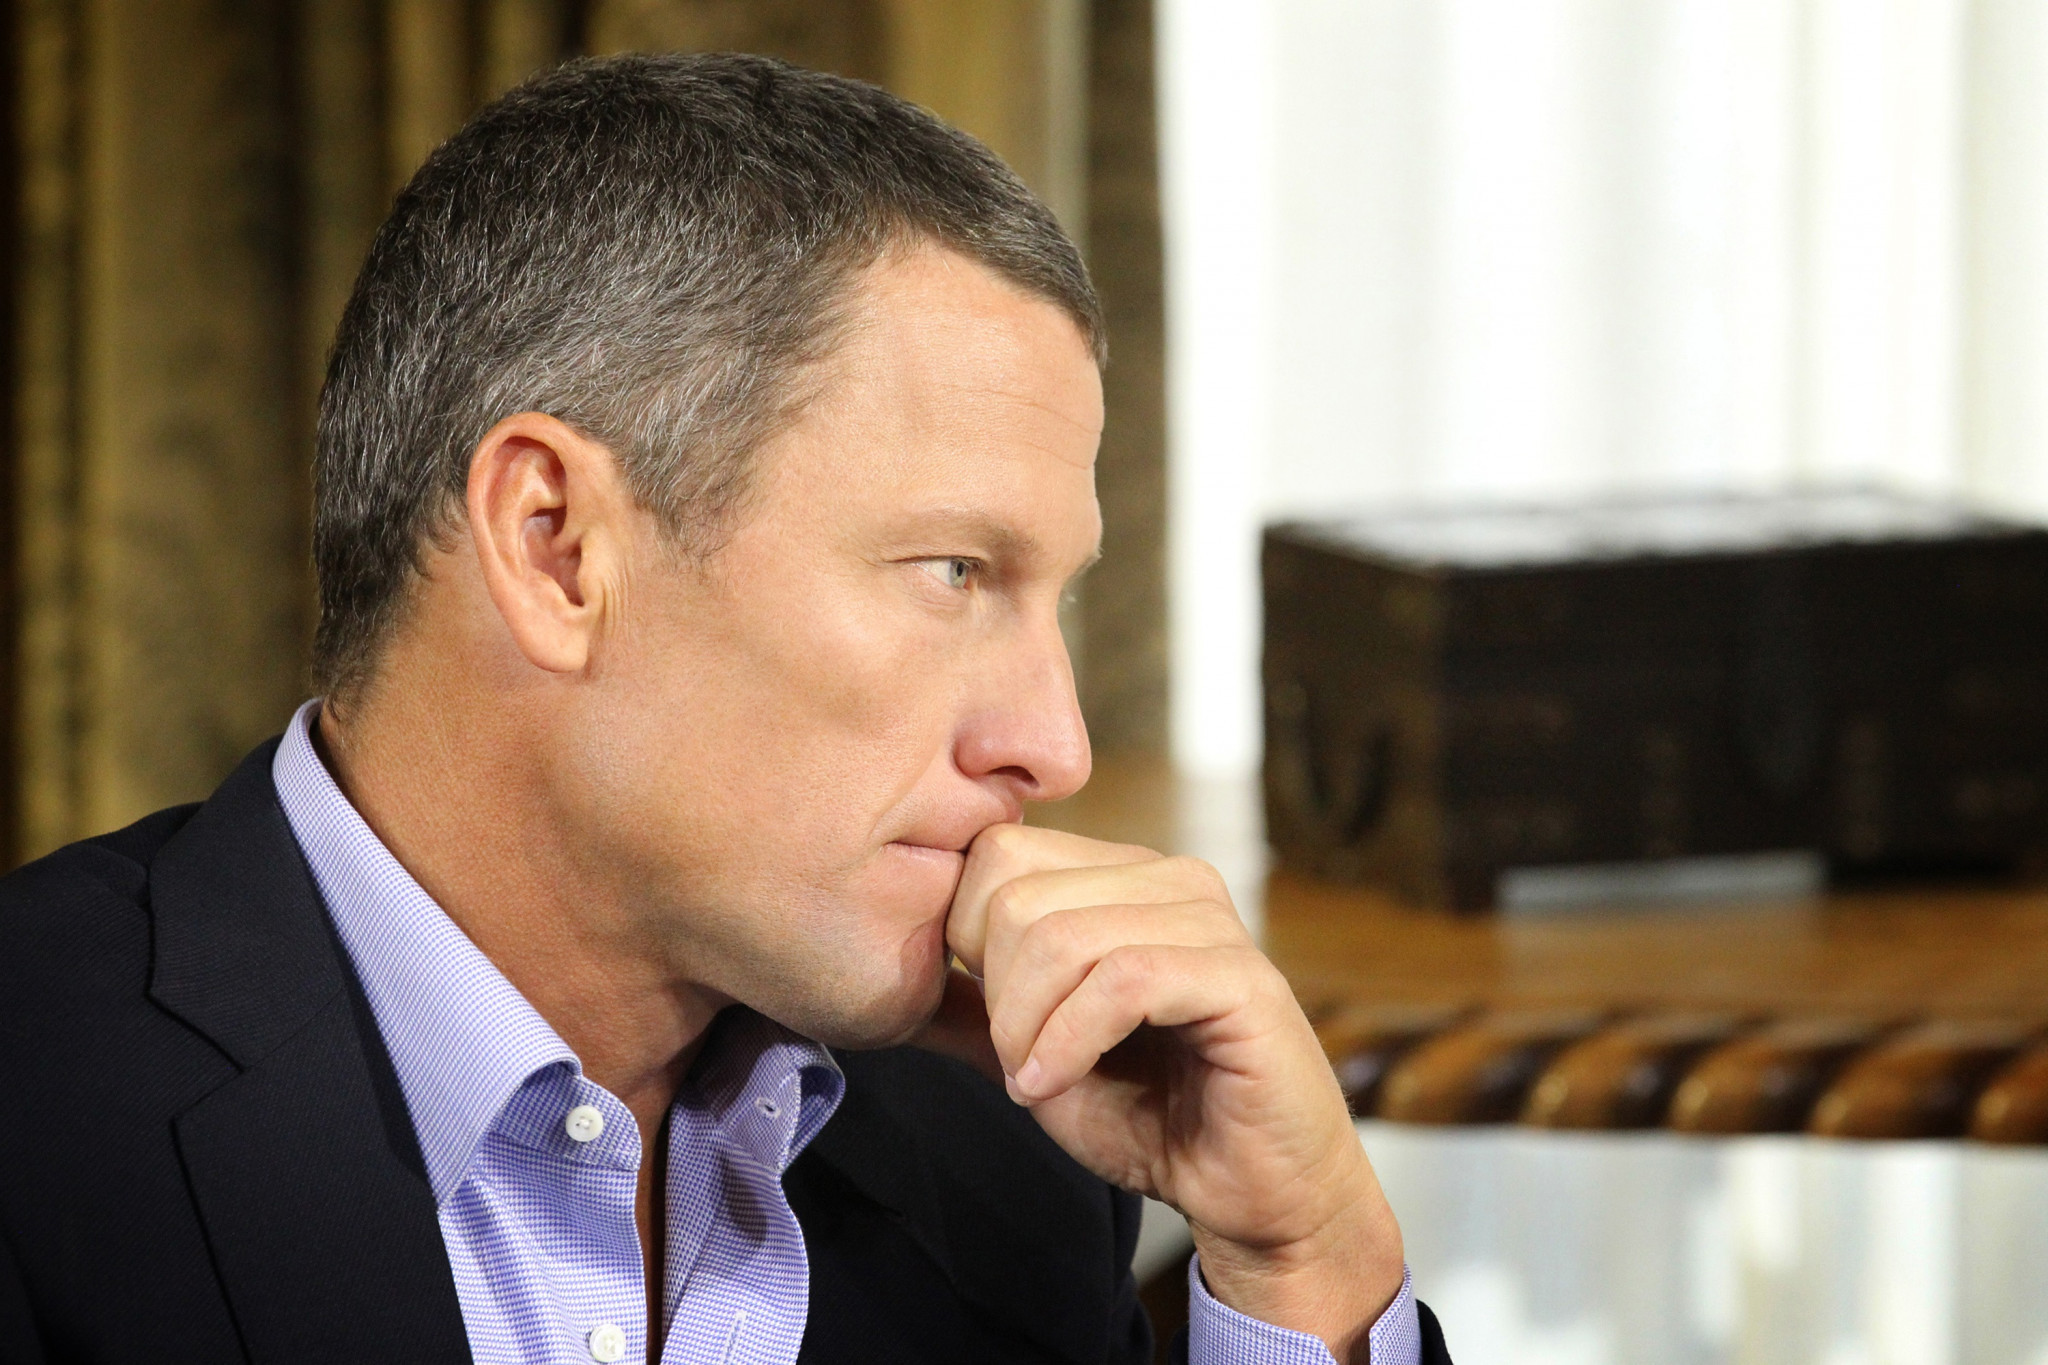 Disgraced cyclist Lance Armstrong admits doping may have caused testicular cancer